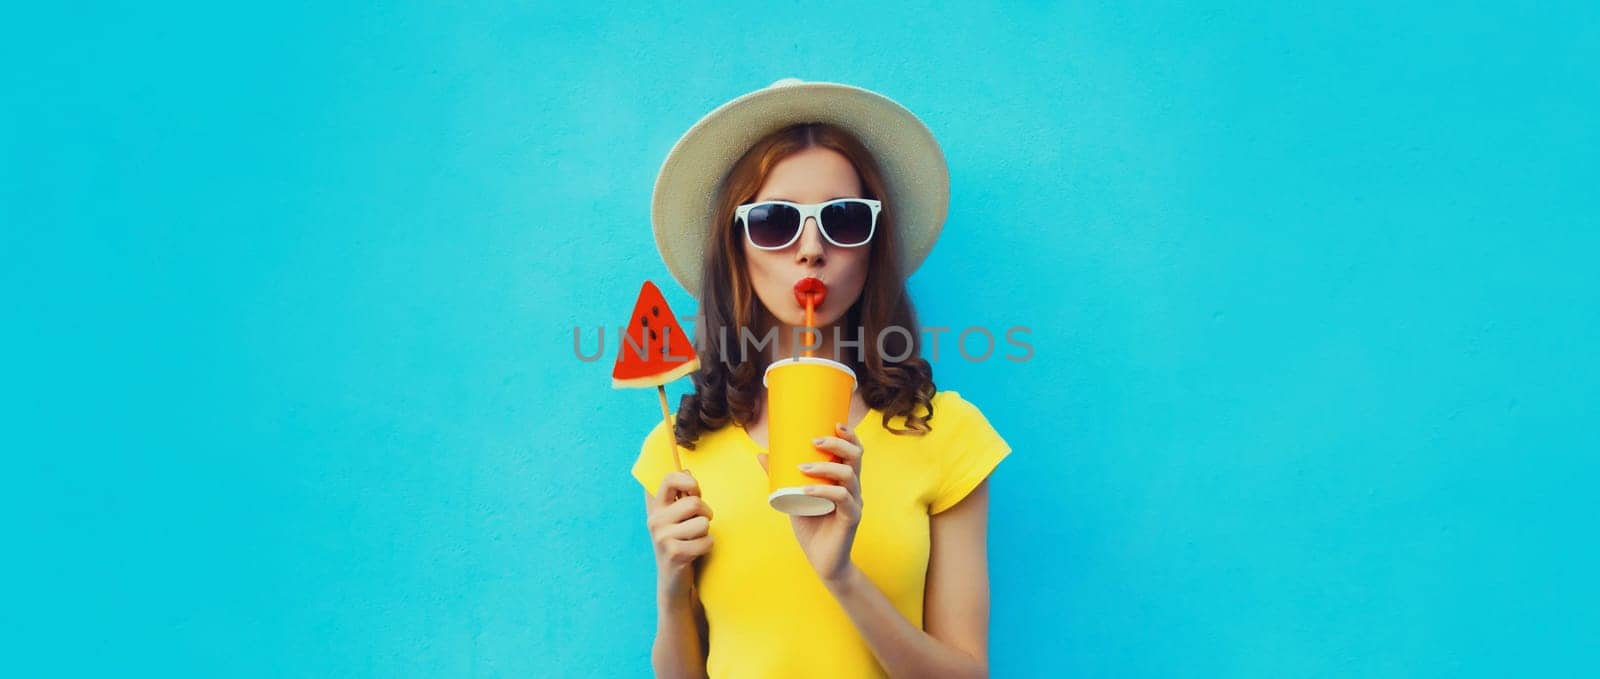 Summer portrait of young woman drinking juice with sweet juicy lollipop or ice cream shaped slice of watermelon wearing straw hat on blue background